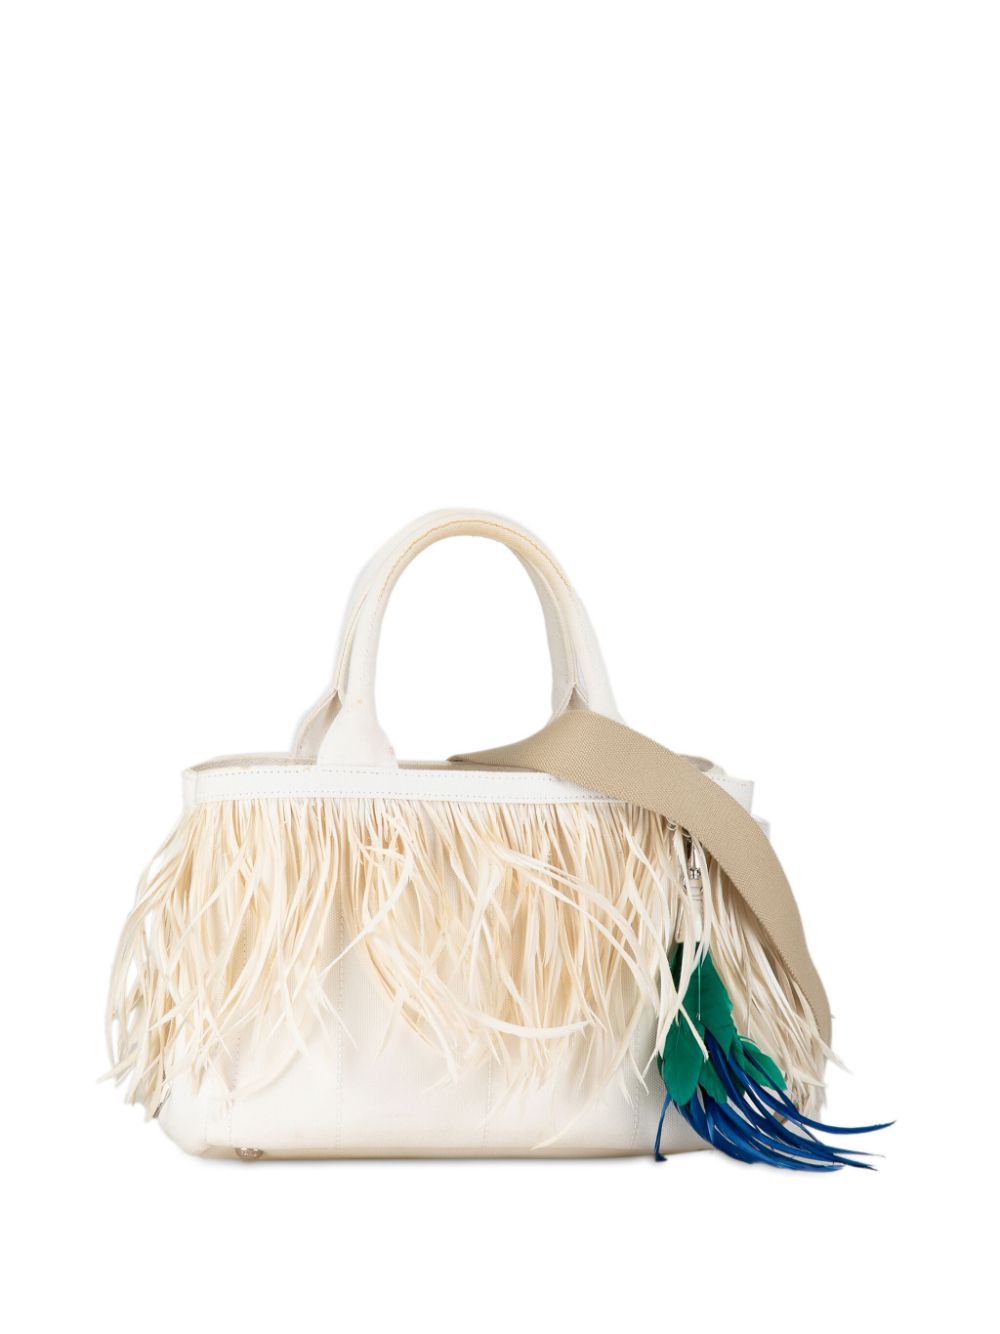 Prada Pre-Owned 2013-2020 Feather Trimmed Canapa satchel - White von Prada Pre-Owned